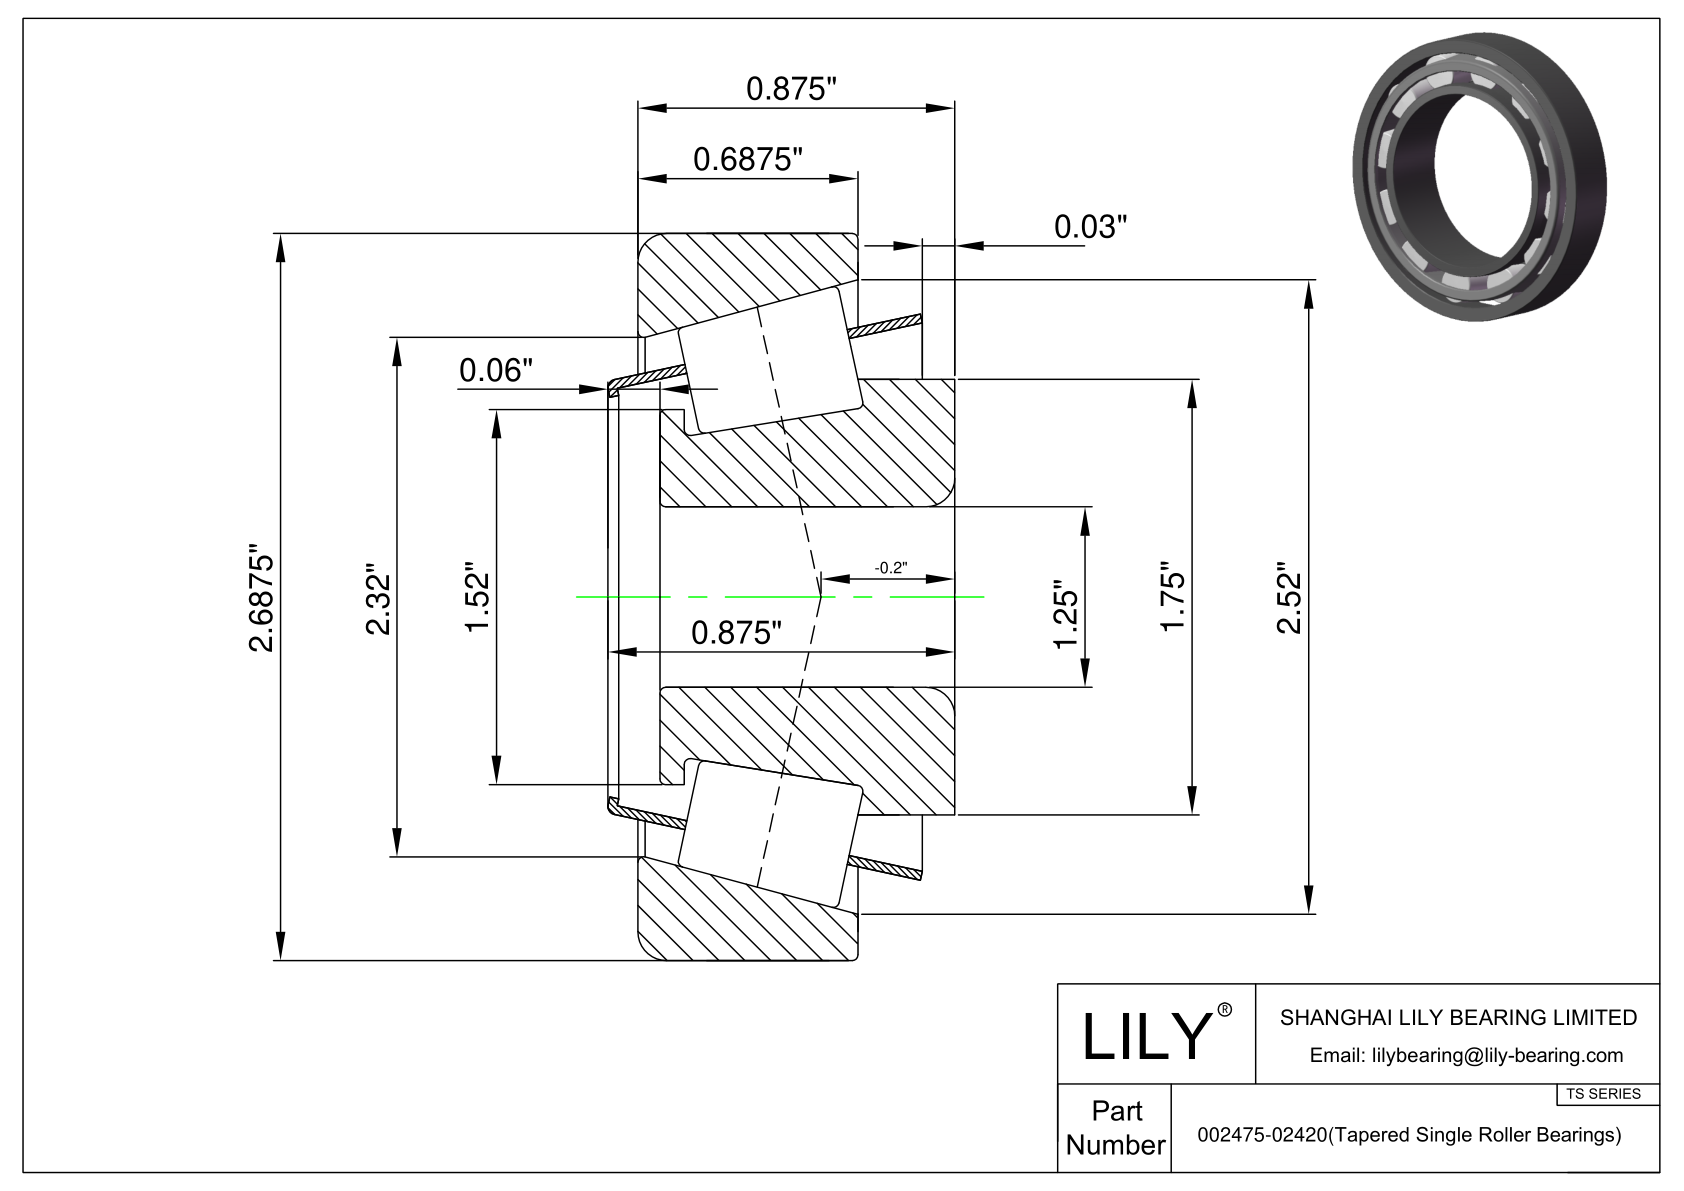 02475-02420 TS (Tapered Single Roller Bearings) (Imperial) cad drawing